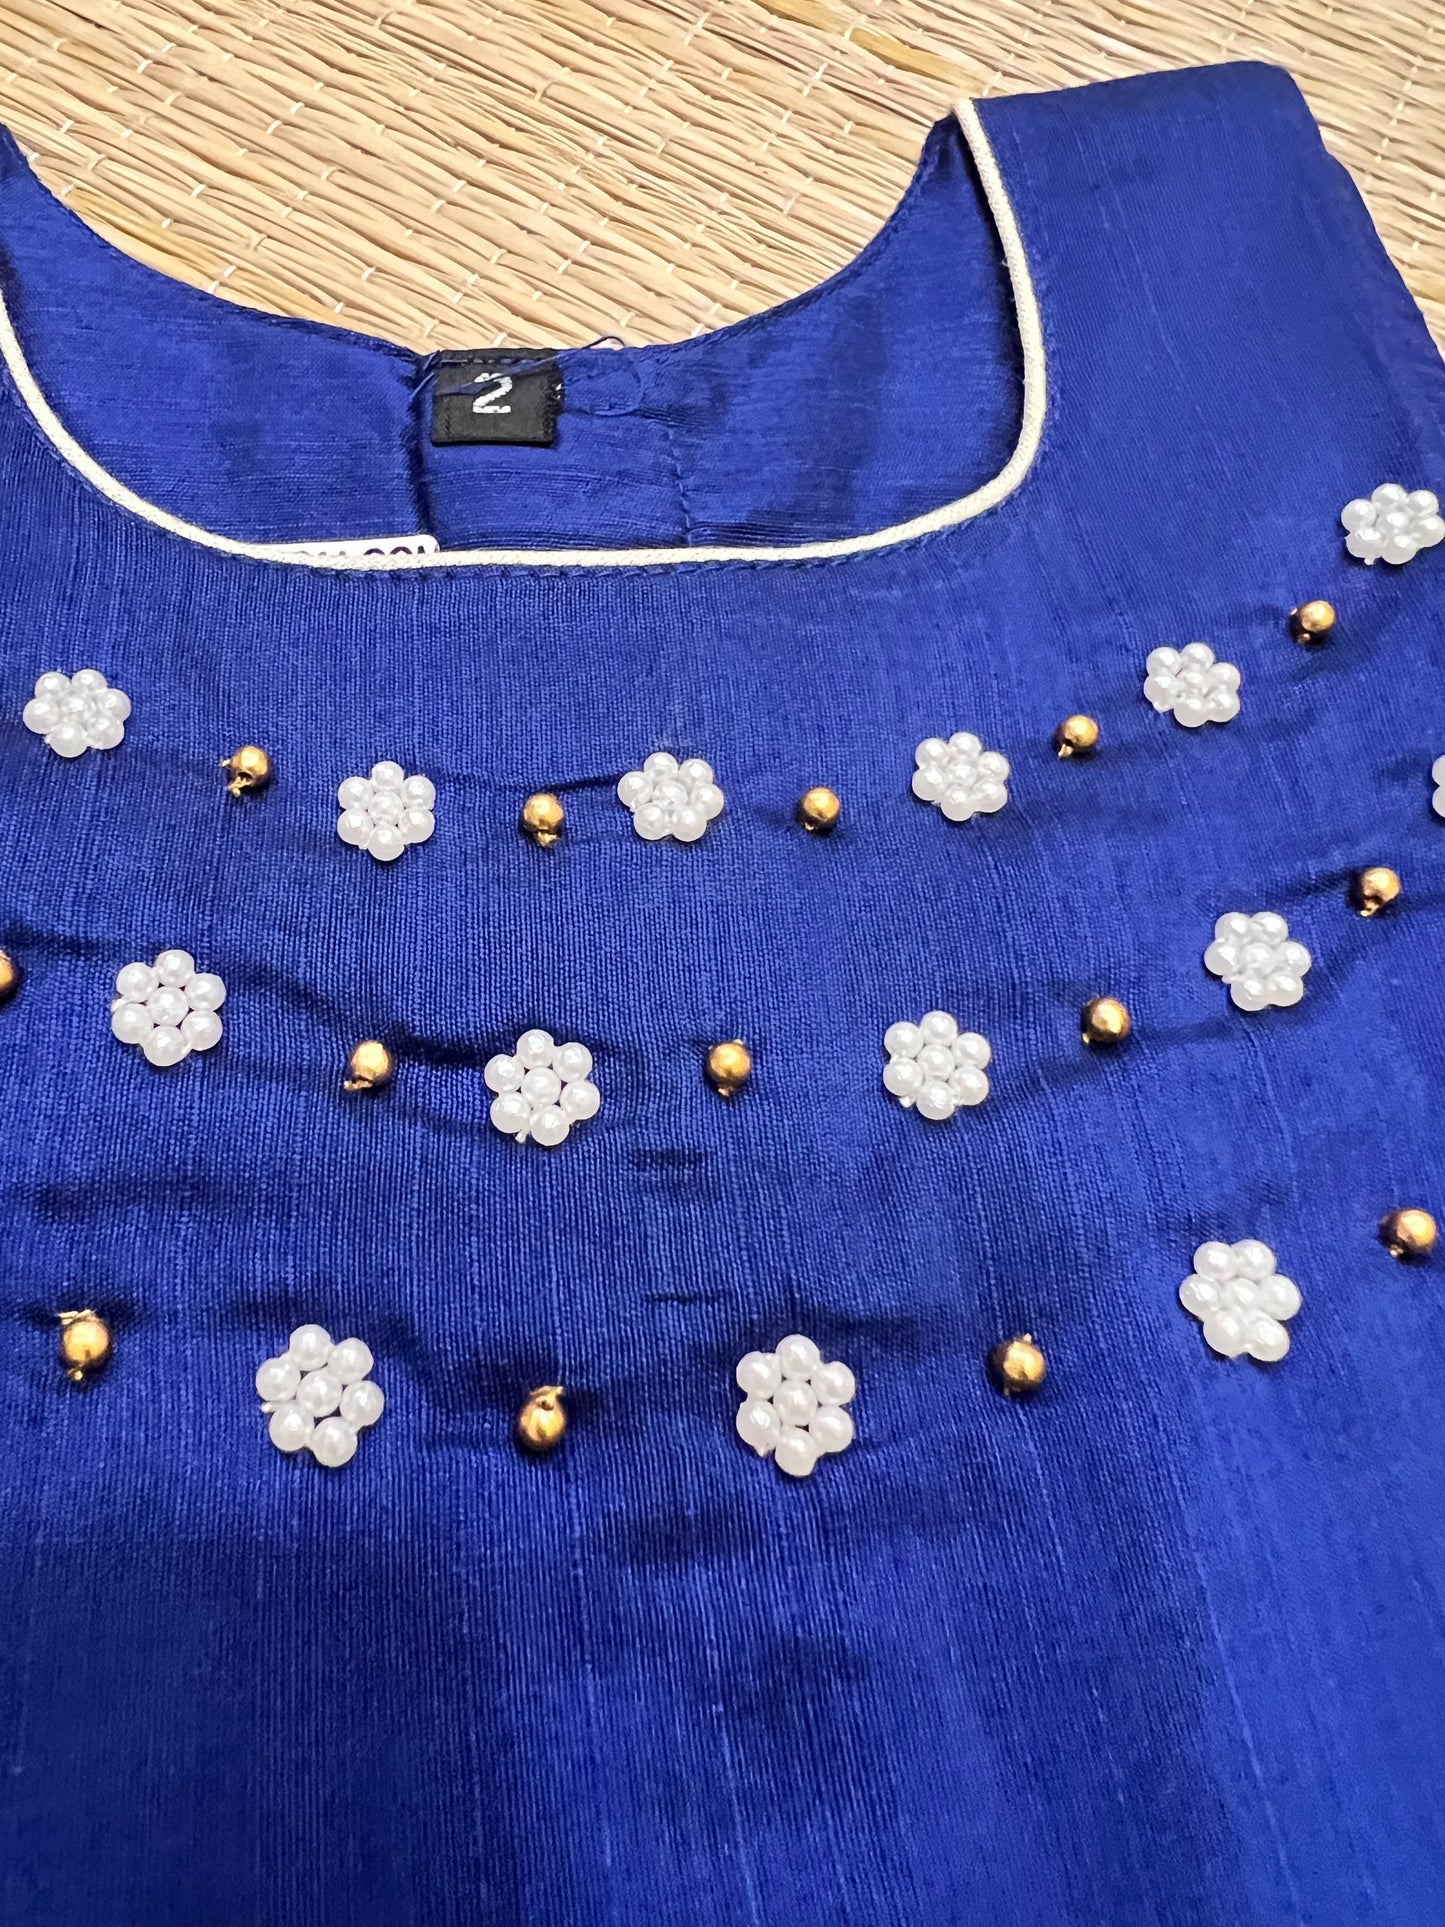 Southloom Kerala Pavada Blouse with Blue Bead Work Design